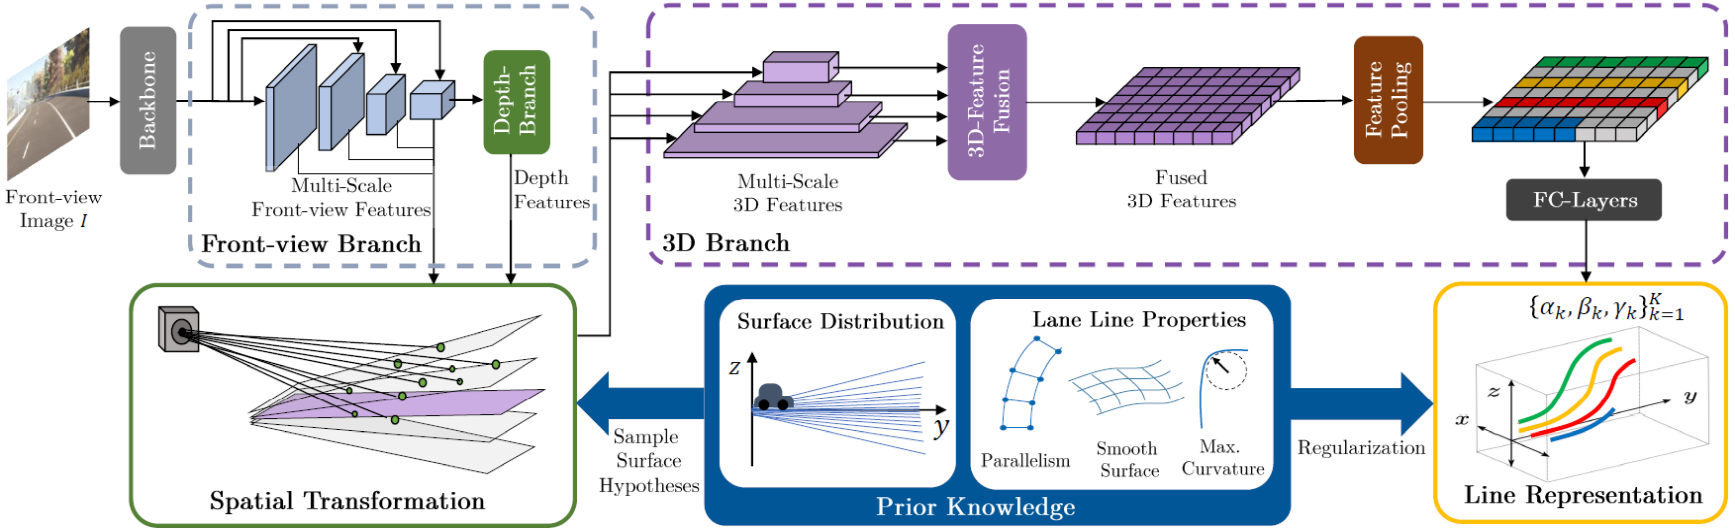 LaneCPP: Continuous 3D Lane Detection using Physical Priors